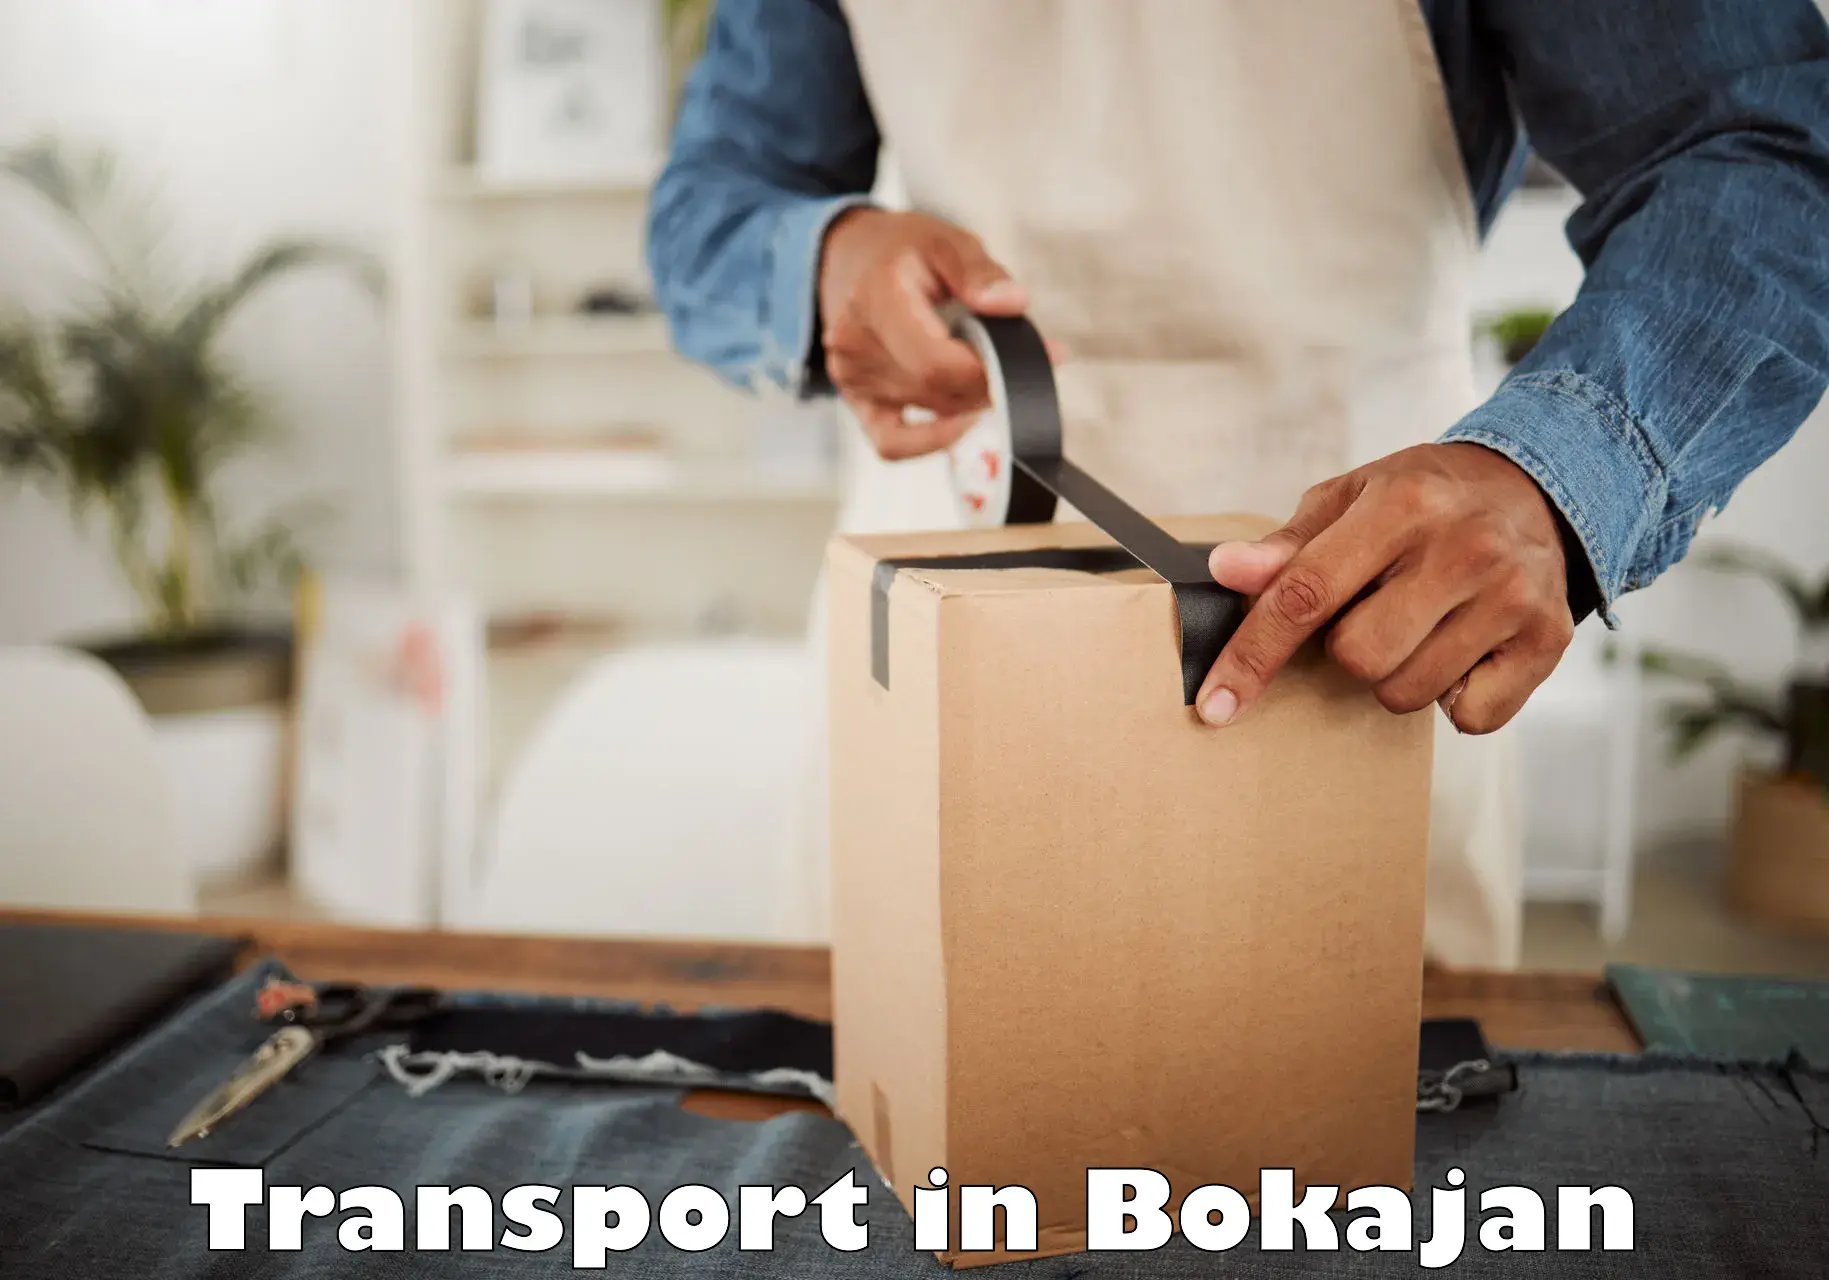 Transport bike from one state to another in Bokajan